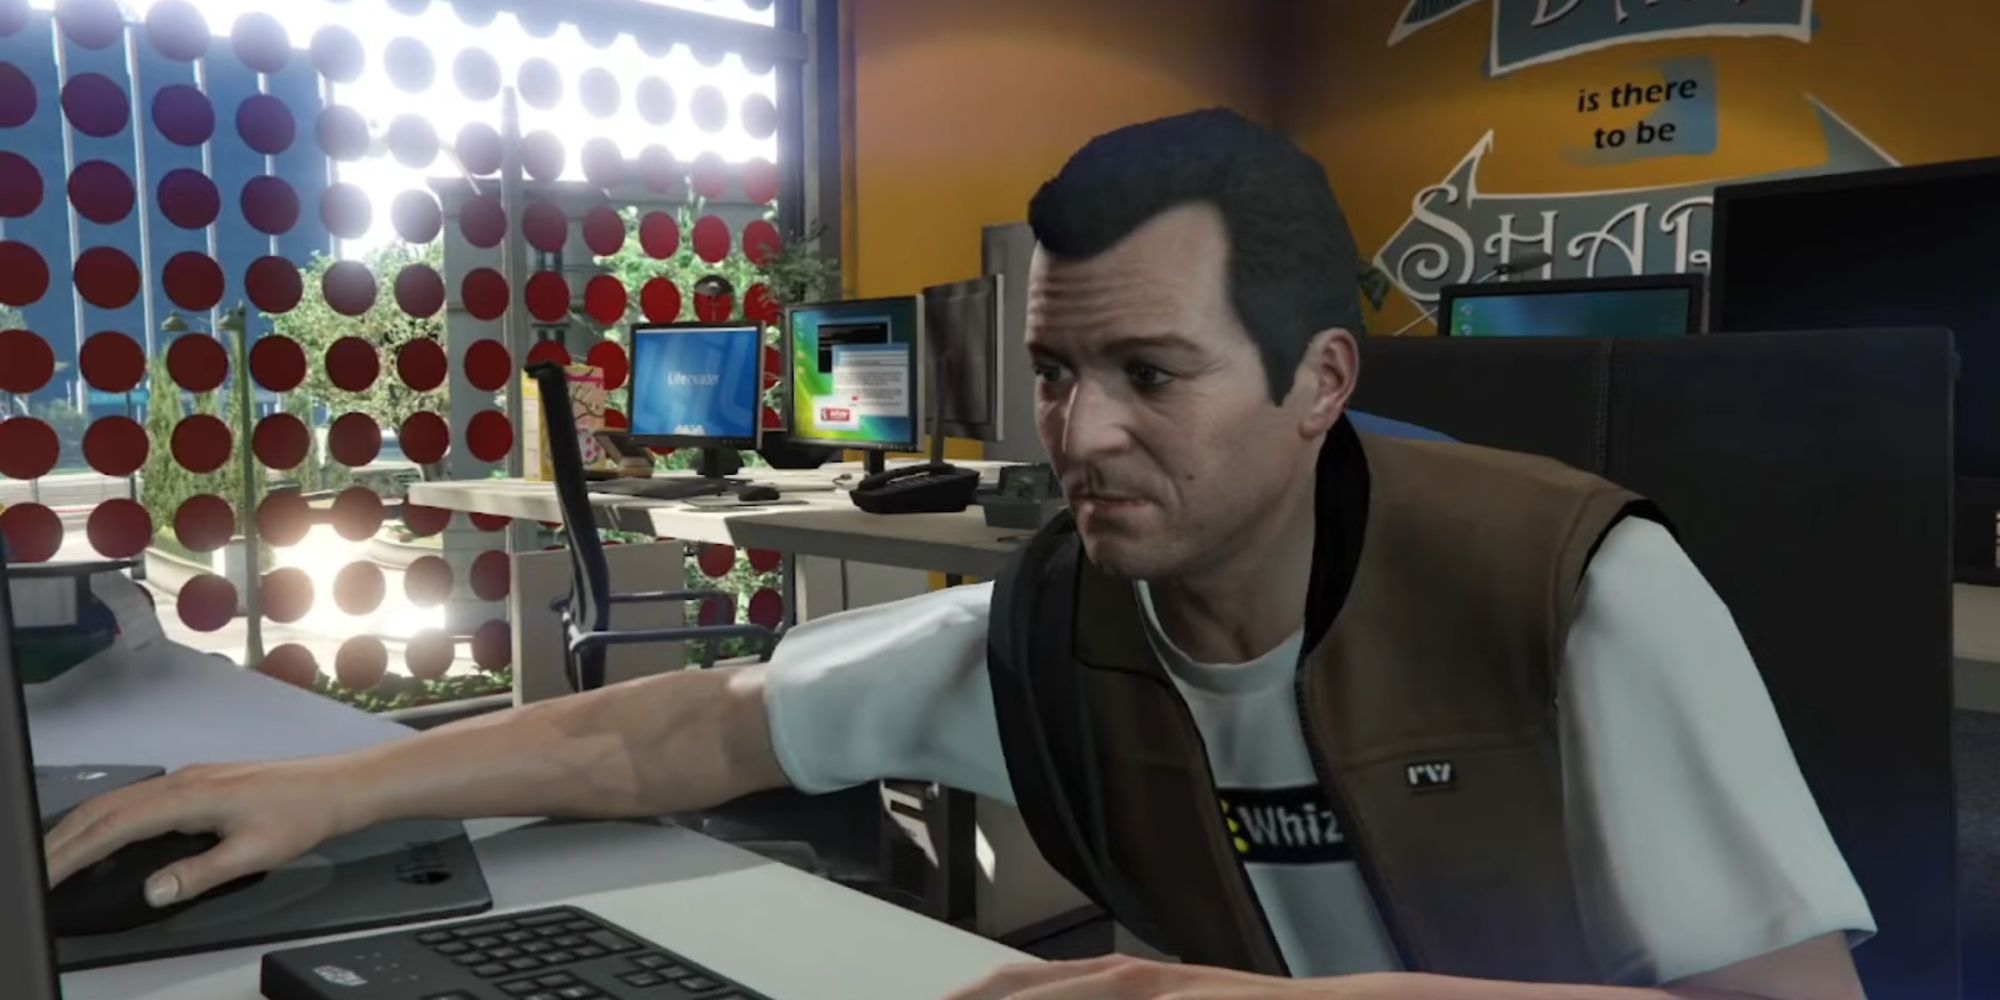 Michael in the GTA V mission, friend request. Attempting to use a computer.